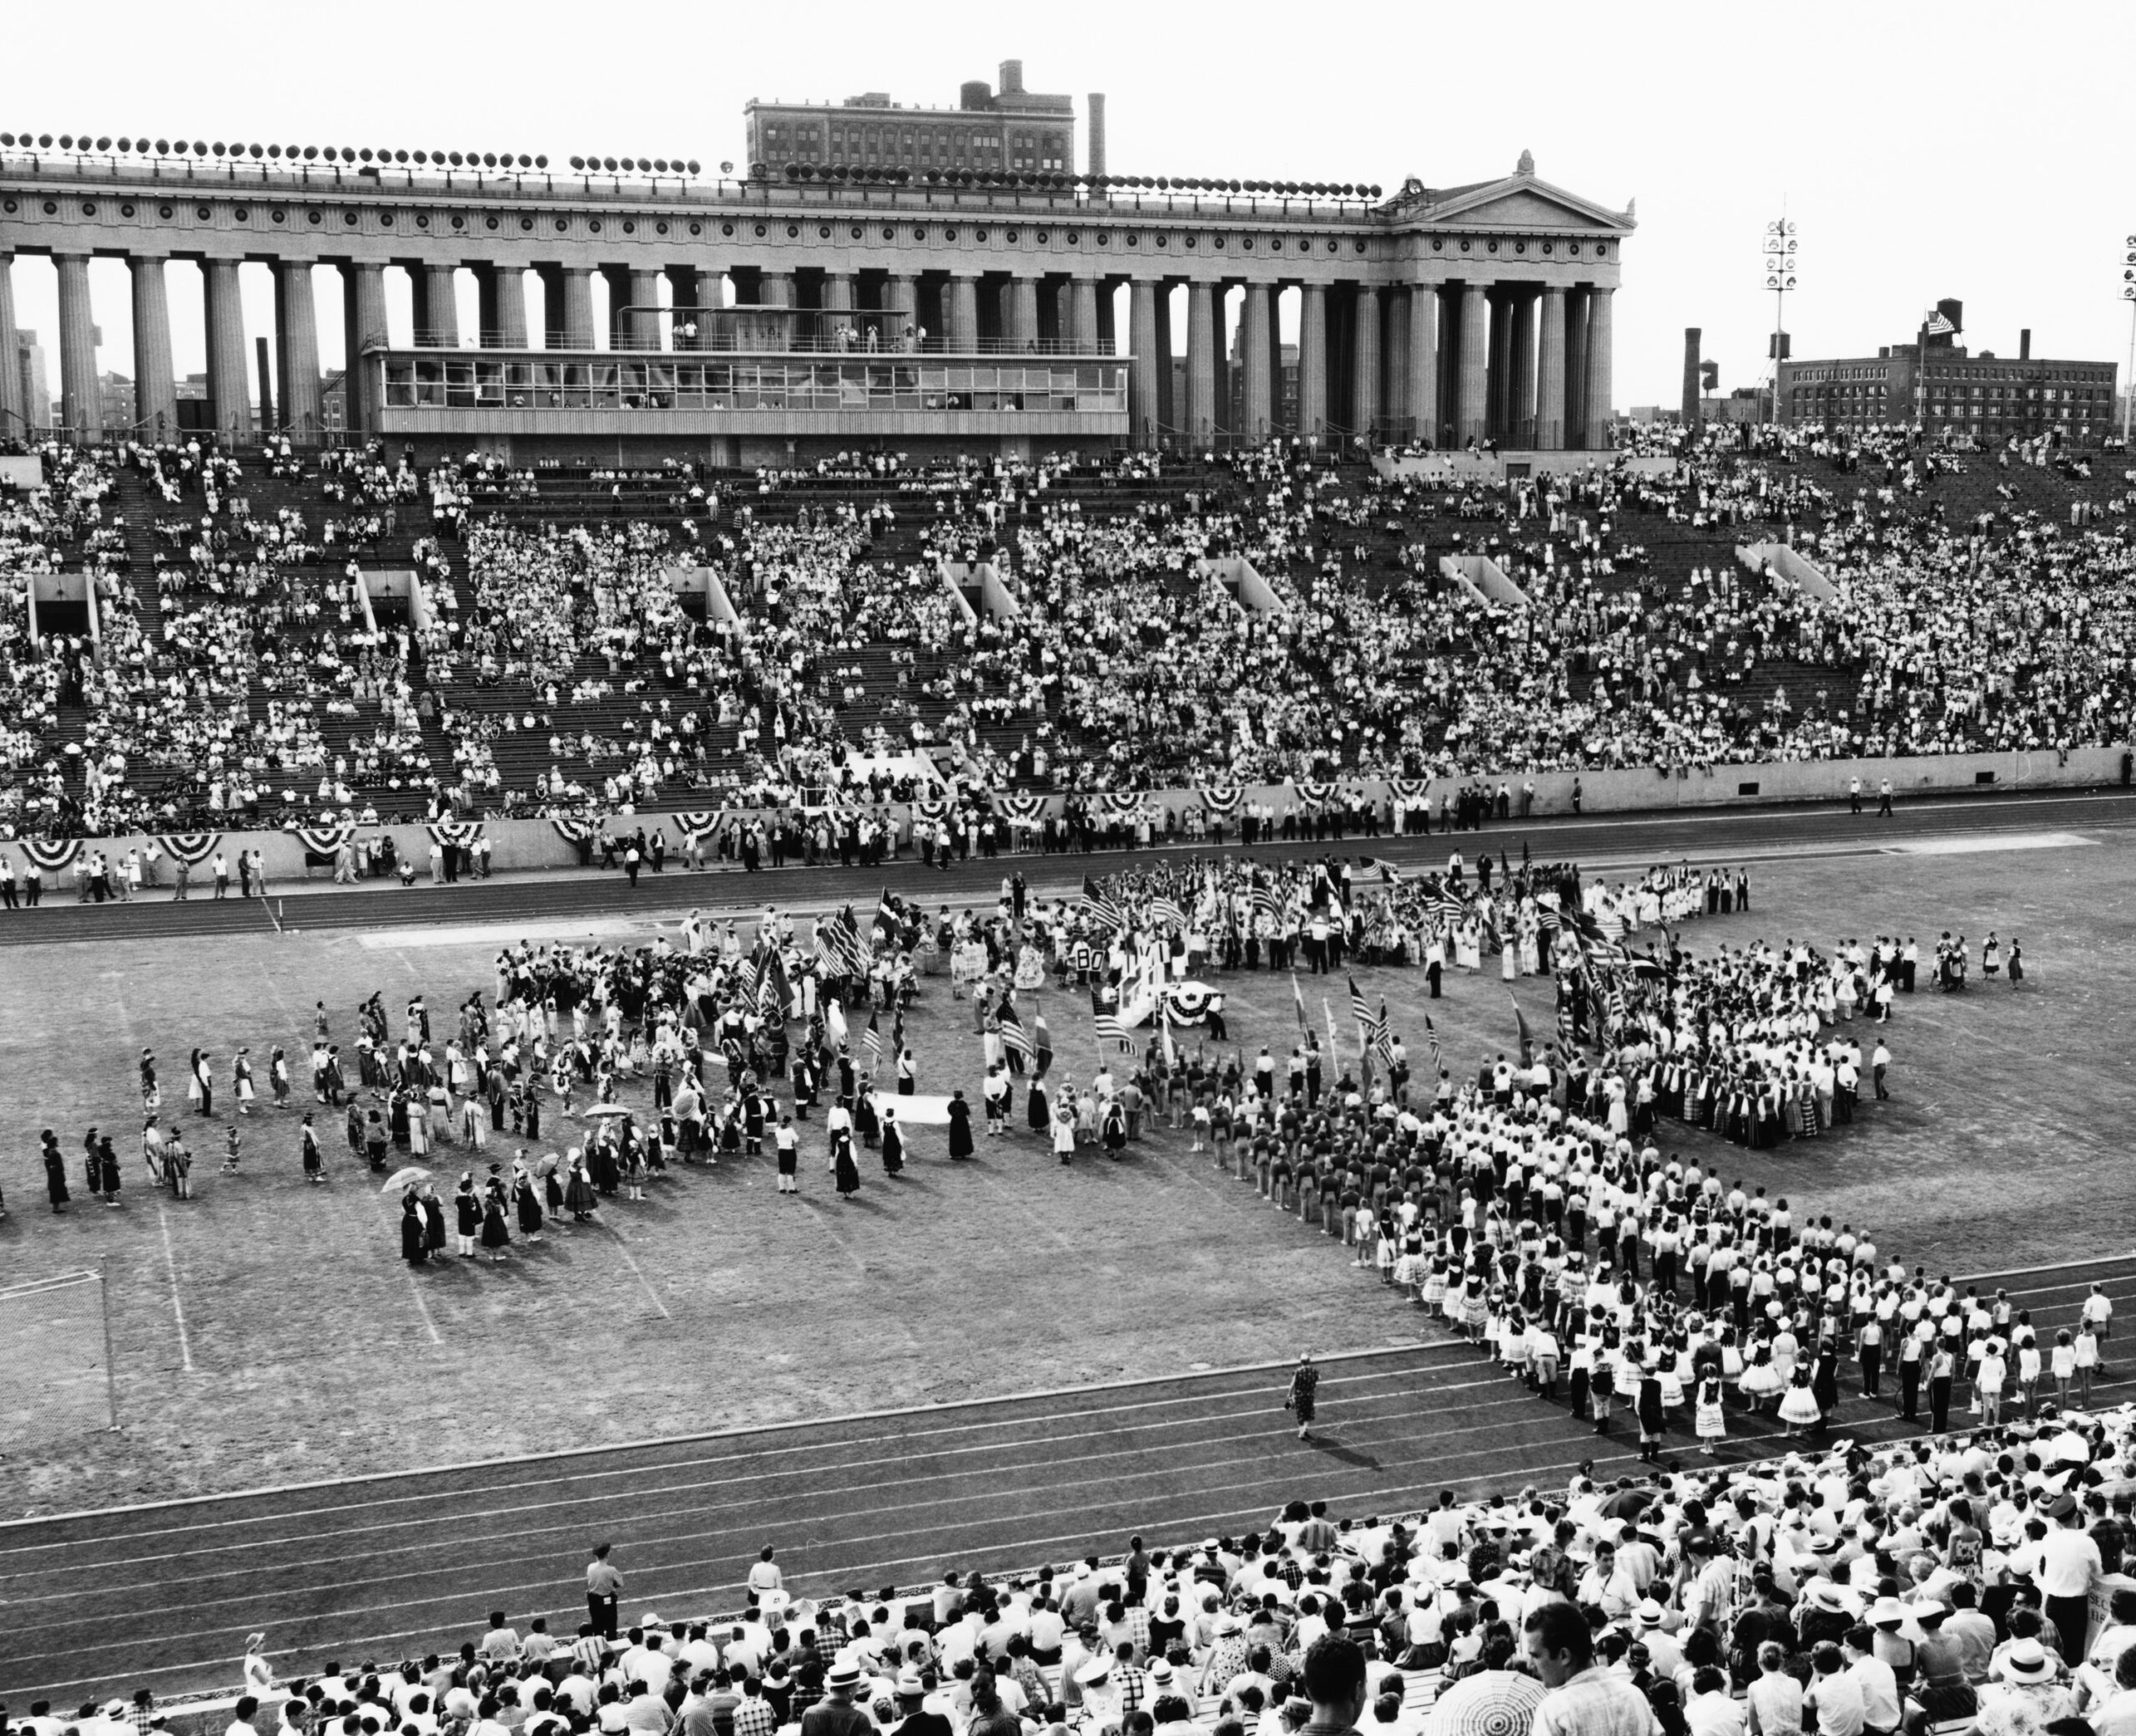 Opening day ceremonies of the 1959 Pan American Games at Soldier Field